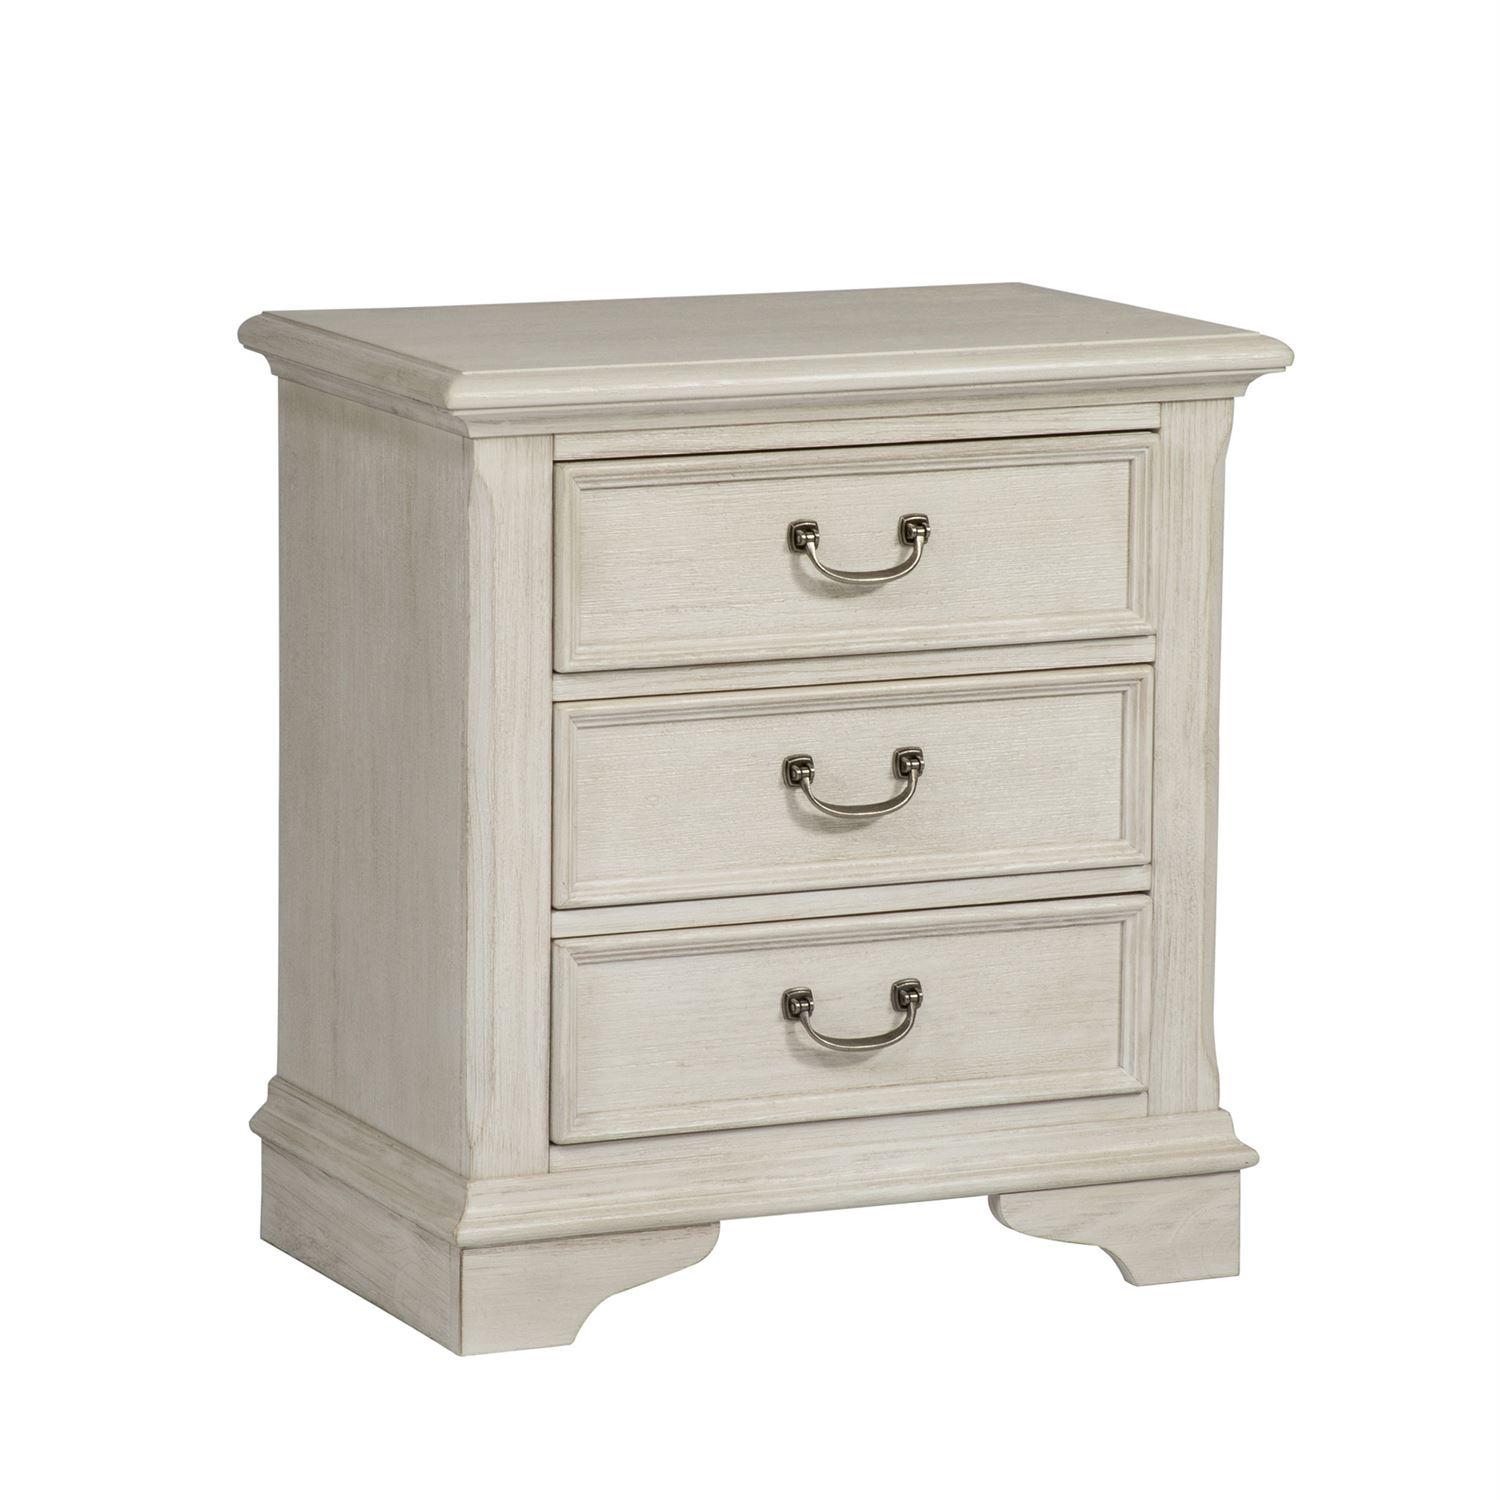 Transitional Nightstand Bayside  249-BR61 249-BR61 in White 